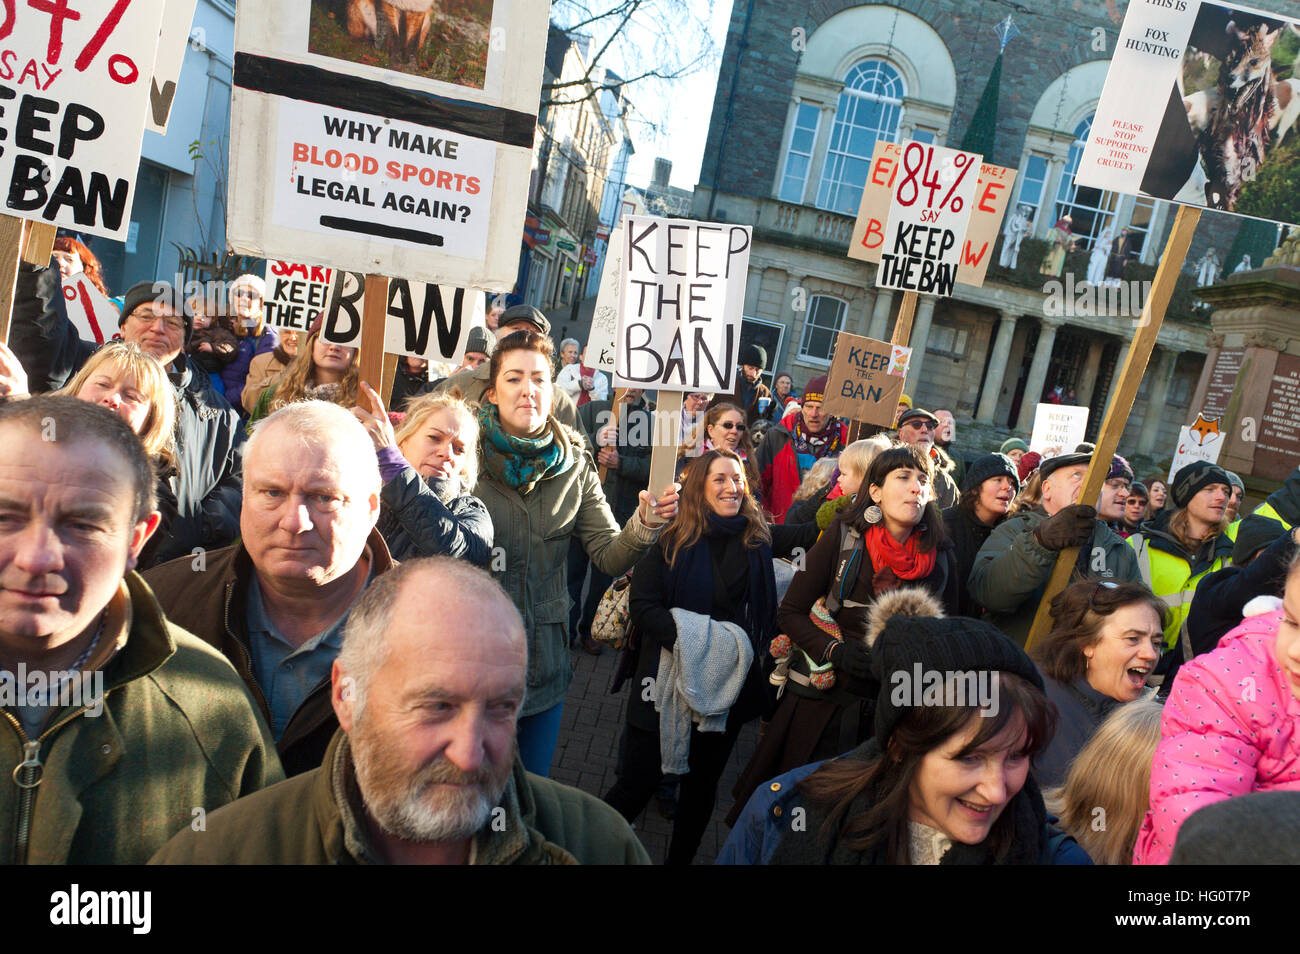 Carmarthen, Carmarthenshire, Wales, UK. 2nd January, 2016. Police keep hunt supporters and hunt protesters apart. Anti-Bloodsport activists gather in the Welsh town of Carmarthen to voice their anger at the continued illegal hunting with dogs - hunting with dogs was made illegal in 2004 by The Hunting Act 2004 (c37). The Anti-Hunt protest takes place on the day that the Carmarthenshire Hunt have chosen to parade through the town to collect money and support for their blood-sports. © Graham M. Lawrence/Alamy Live News. Stock Photo